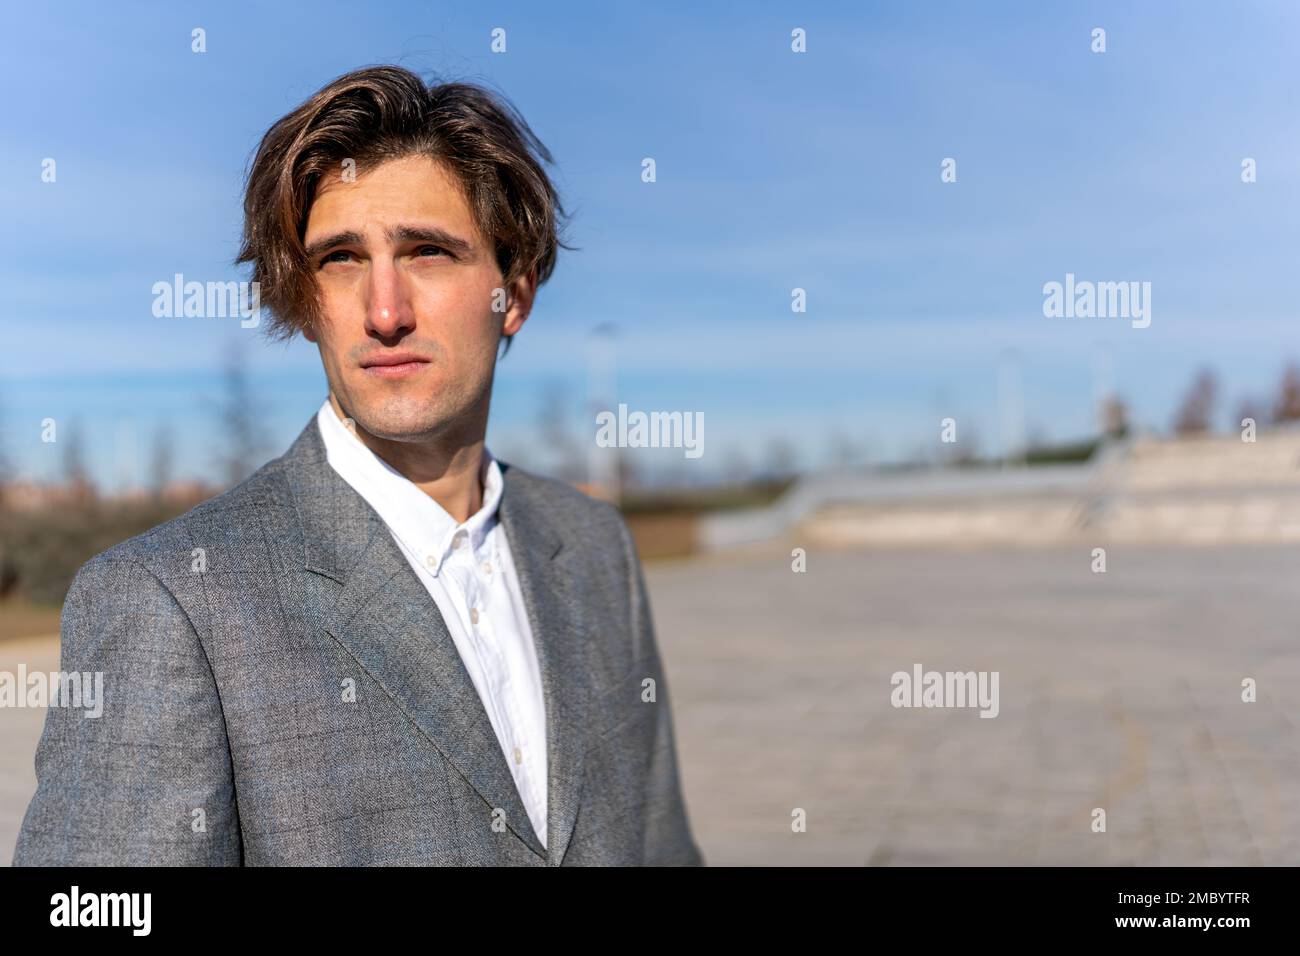 Thoughtful businessman wearing classy suit looking away while standing on street against blue sky Stock Photo